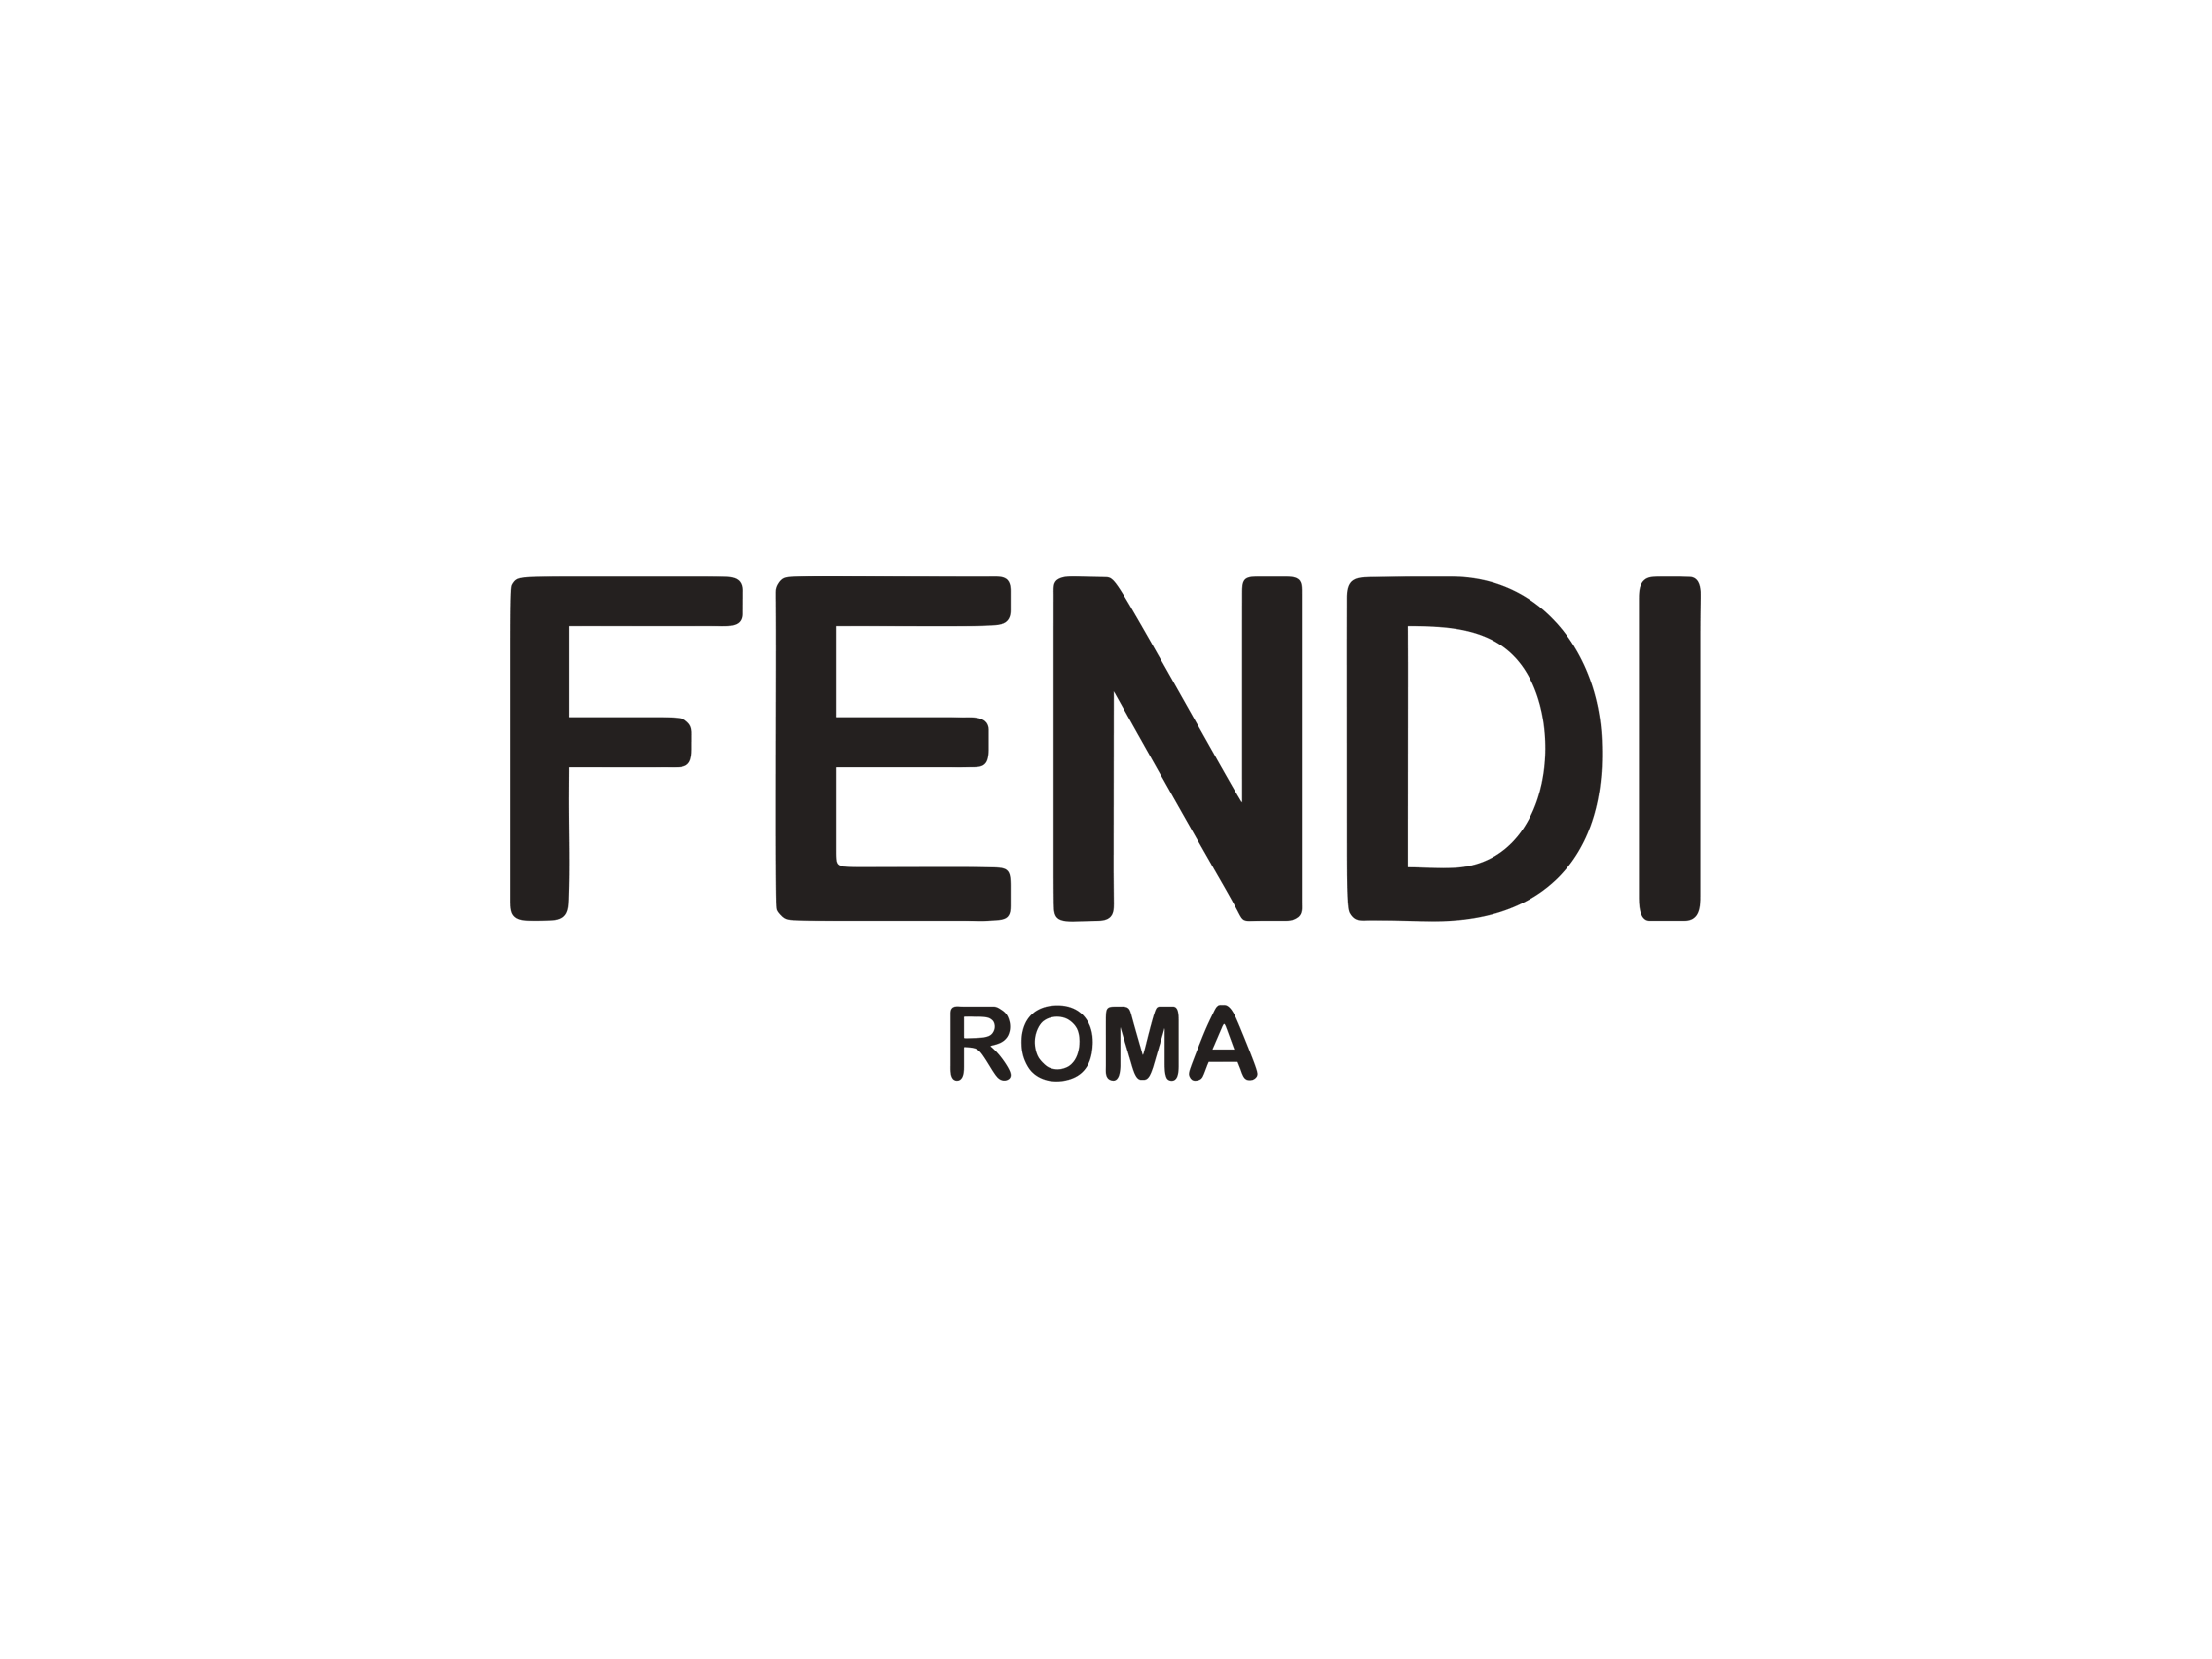 Fendi HD Wallpapers and Backgrounds